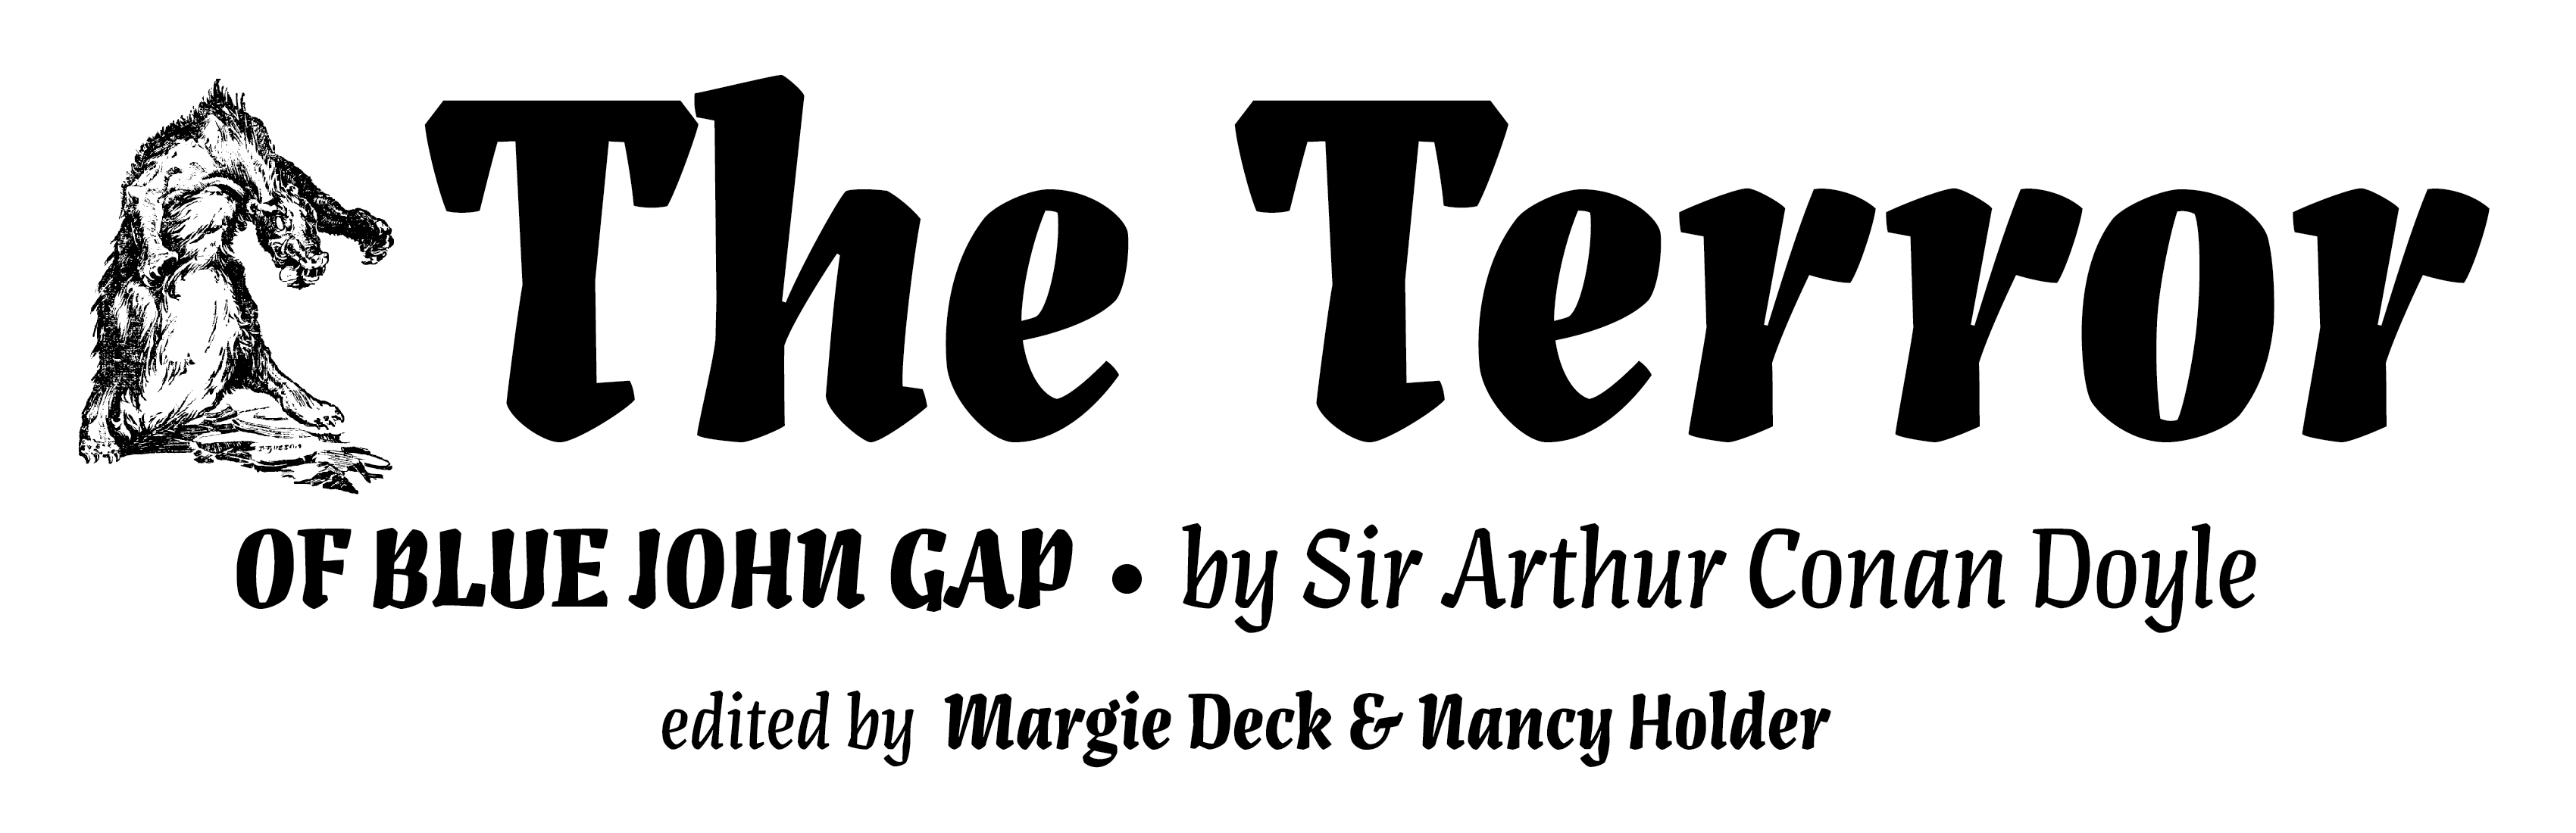 header for a page of the Blue John Gap Project with the words "The Terror" and an image of the monster